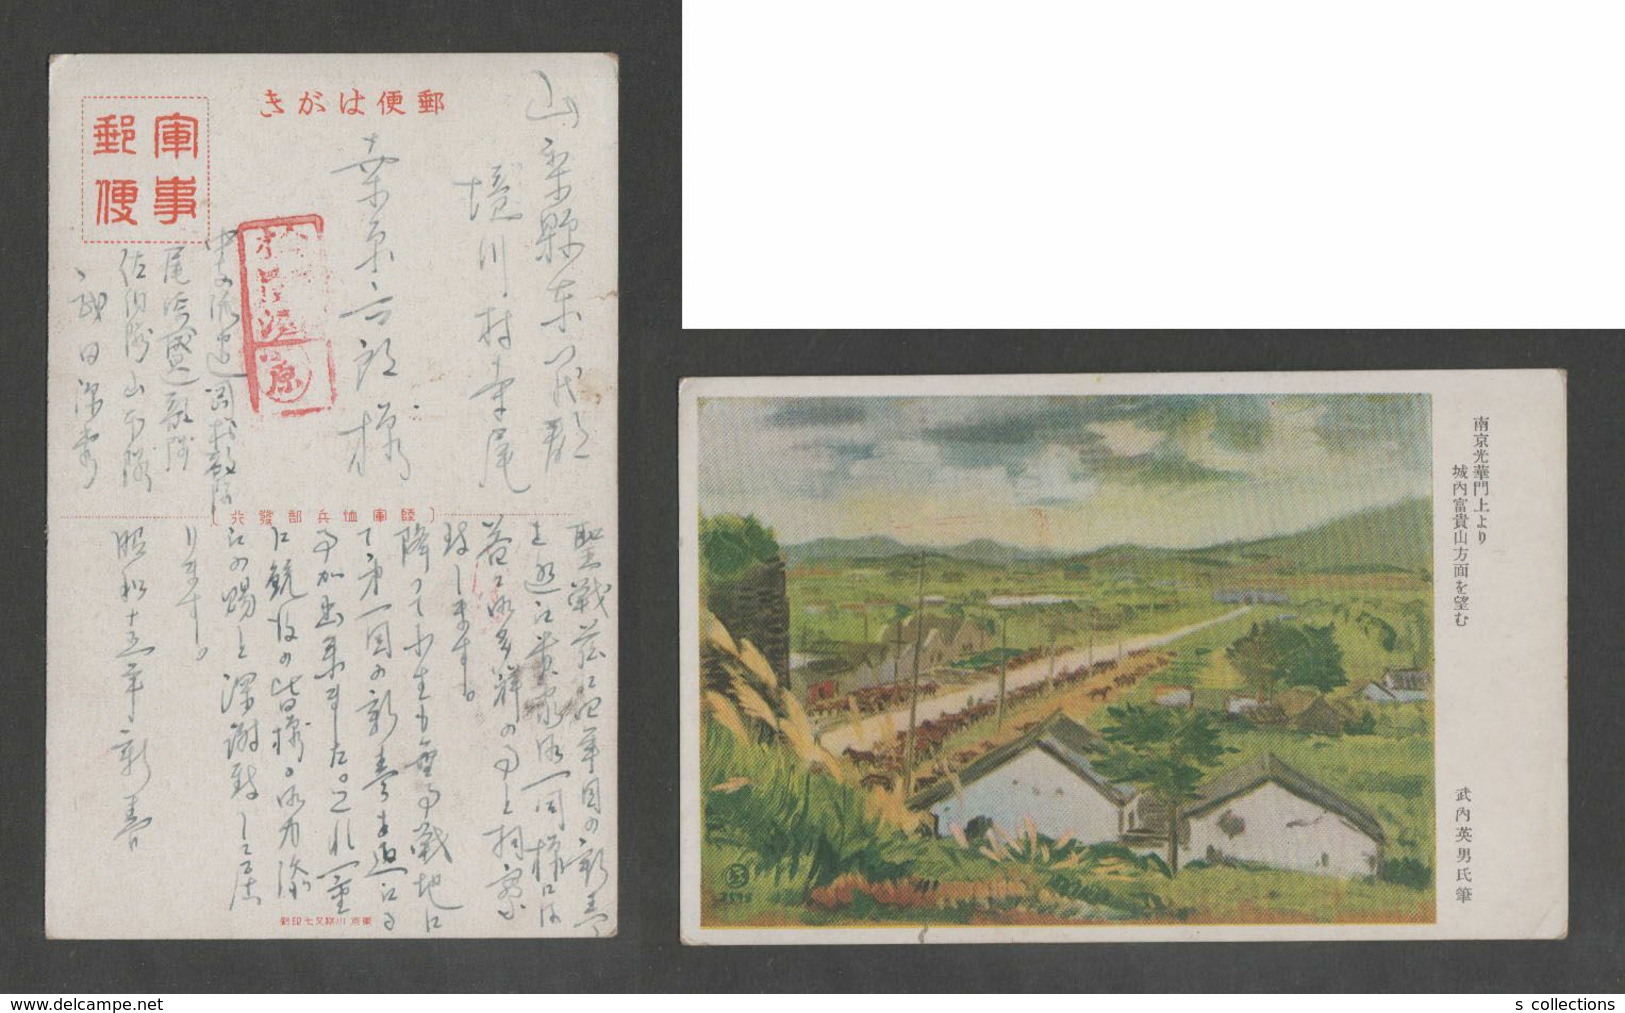 JAPAN WWII Military Nanjing Guanghua Picture Postcard CENTRAL CHINA WW2 MANCHURIA CHINE MANDCHOUKOUO JAPON GIAPPONE - 1943-45 Shanghái & Nankín